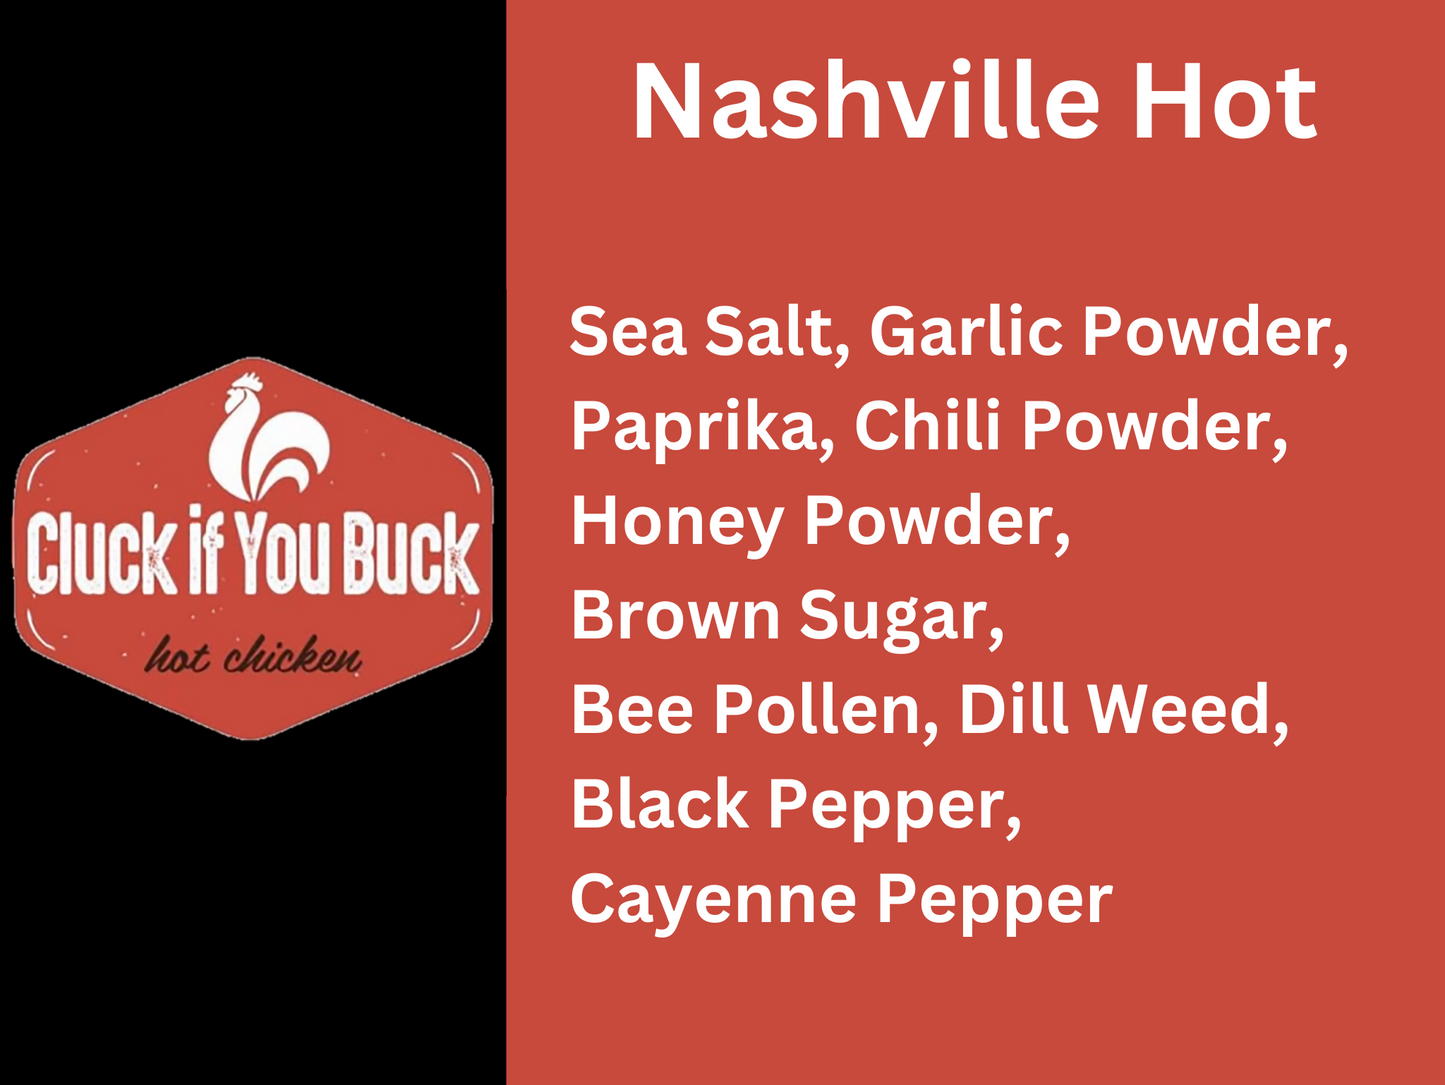 Cluck if You Buck - Variety Pack - Sweet Heat Sea Salt, All-Purpose Chicken, Rib, Brisket, Greens, Tofu, Pork BBQ Rubs and Spices for Frying, Smoking and Grilling - No MSG, Gluten Free